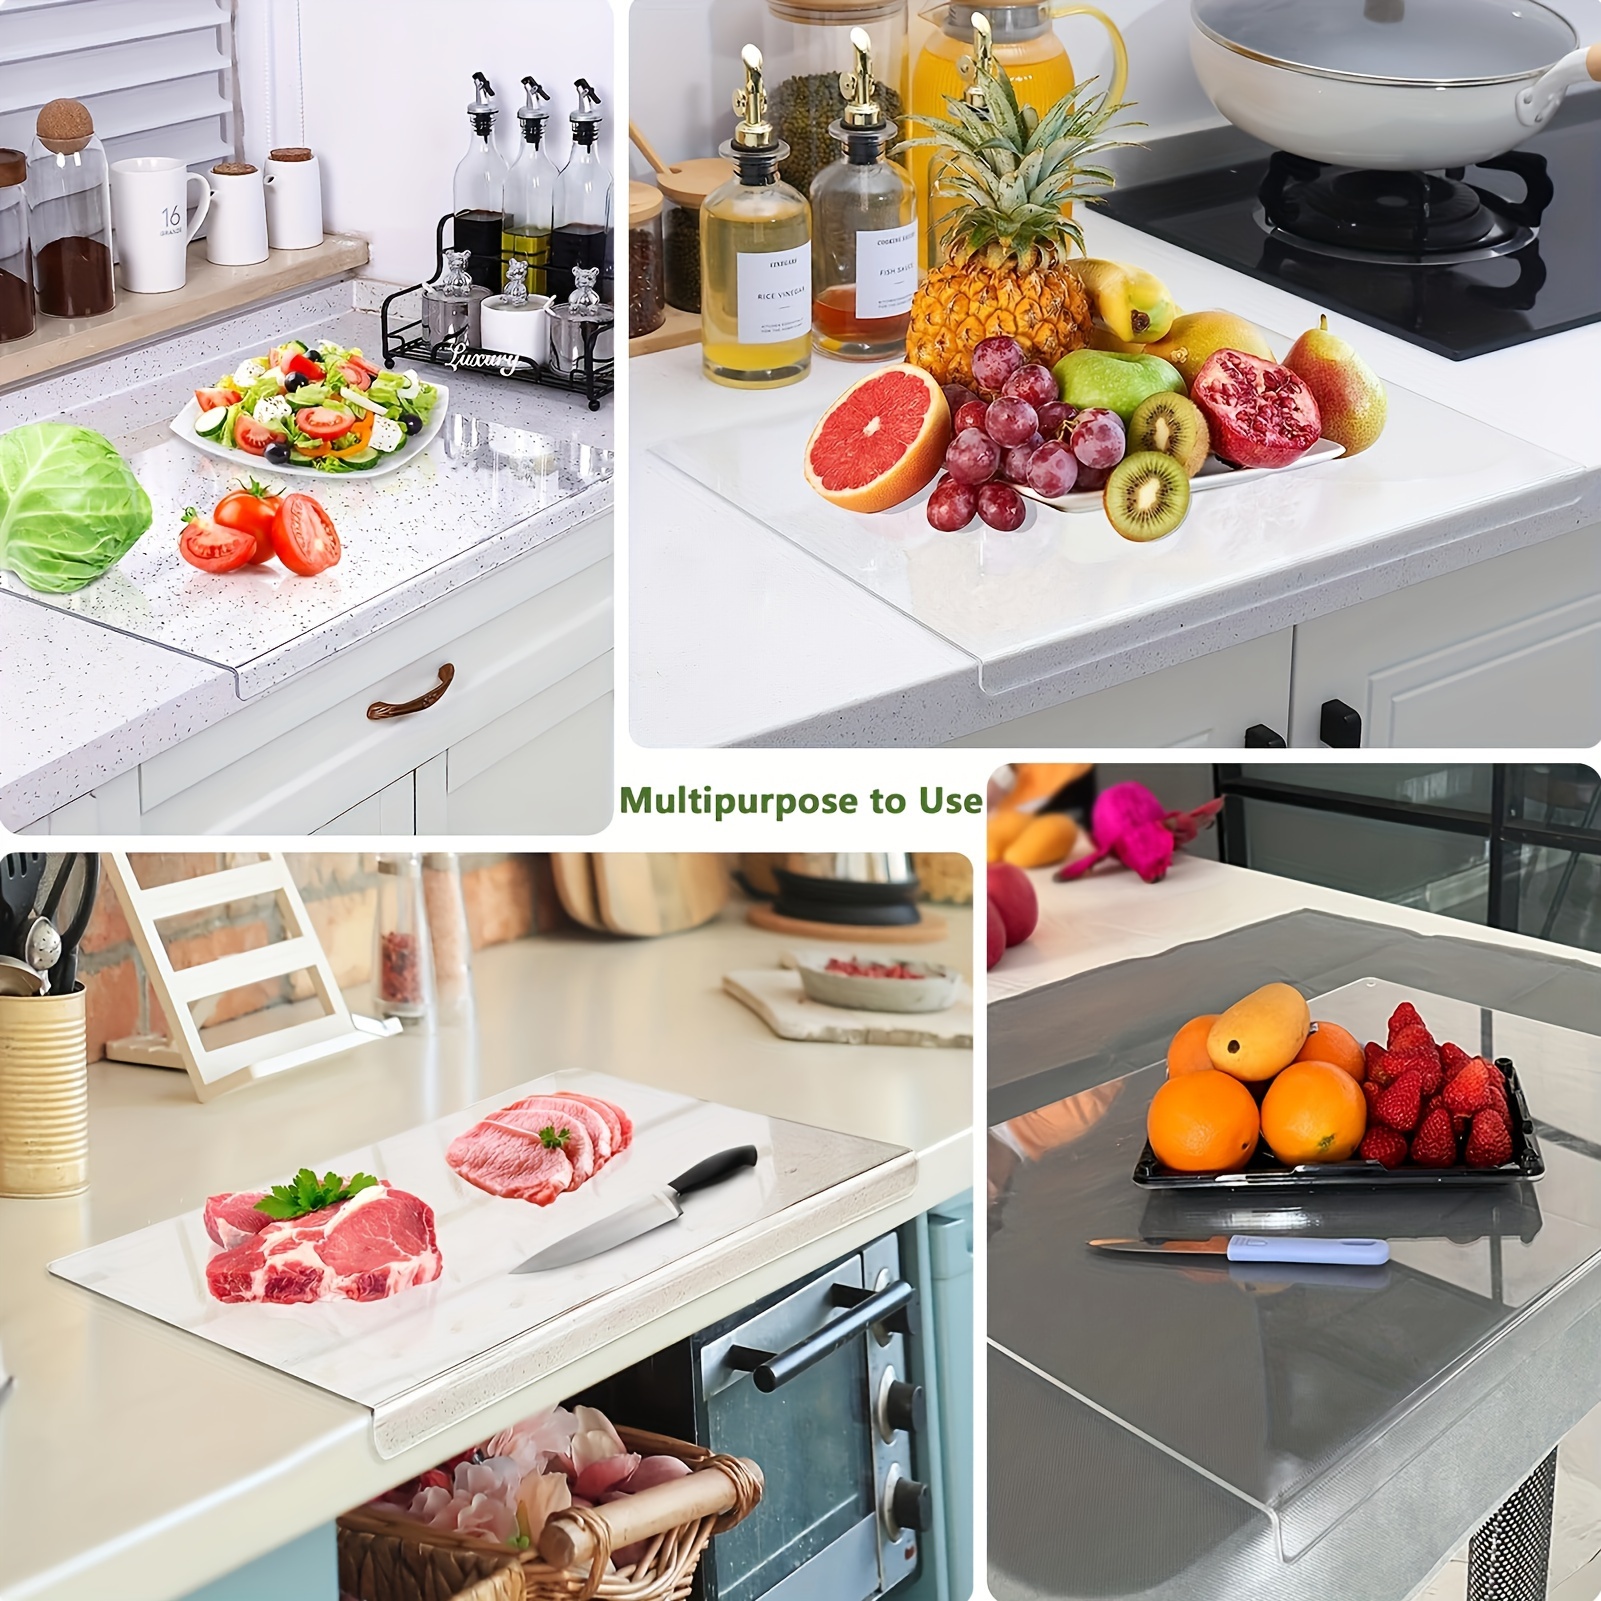 

1 Pcs Acrylic Cutting Boards For Kitchen Counter, 2023 New Clear Cutting Board, Anti-slip Transparent Cutting Board With Lip For Countertop Protector Home Restaurant (18x14 In)